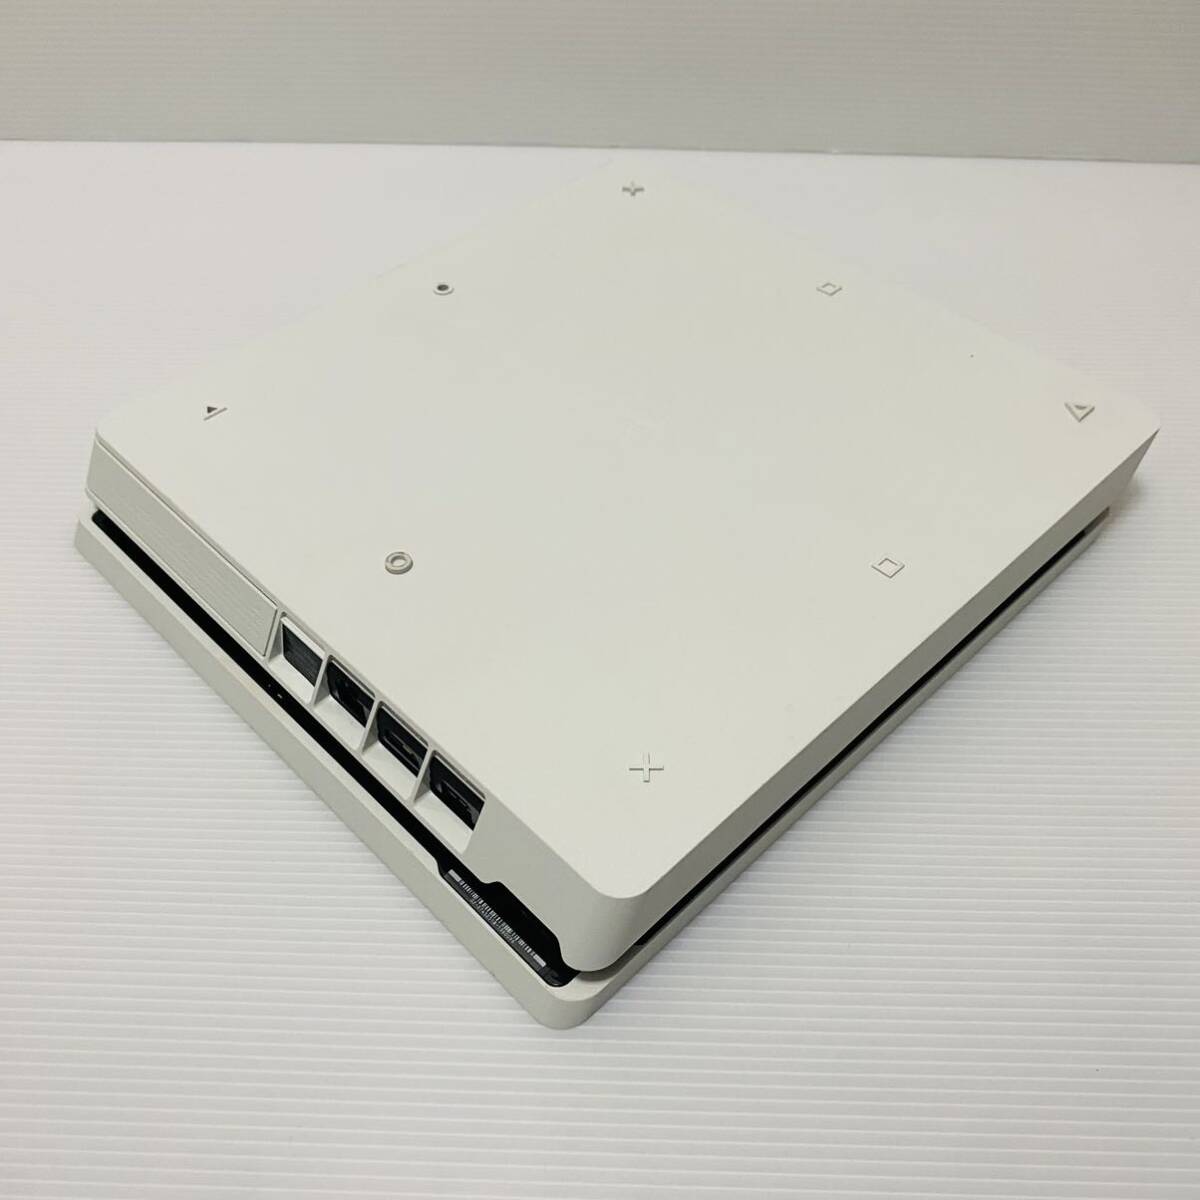 SONY Sony PS4 body PlayStation 4 PlayStation4 PlayStation 4 CUH-2100A operation goods white ⑩